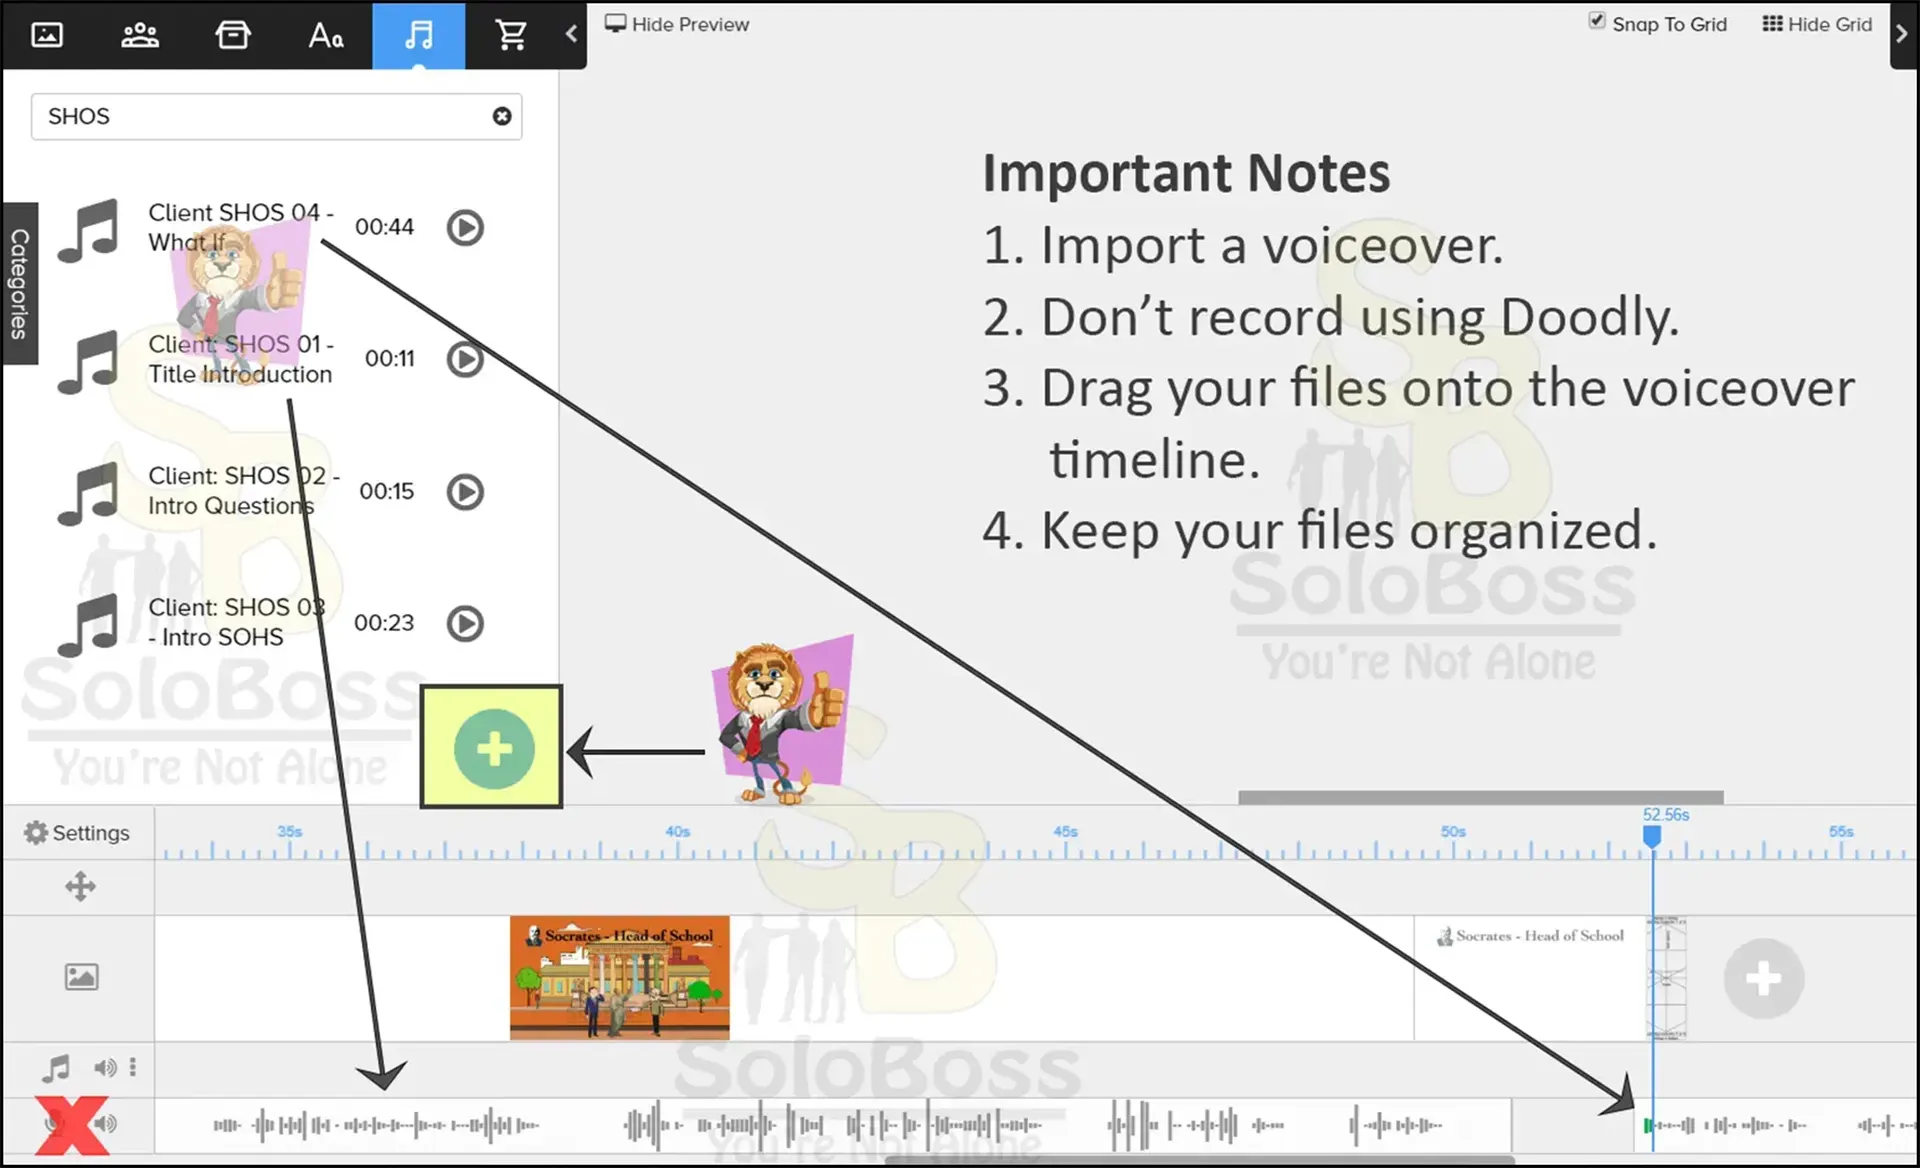 Showing how to post your Doodly audio files.